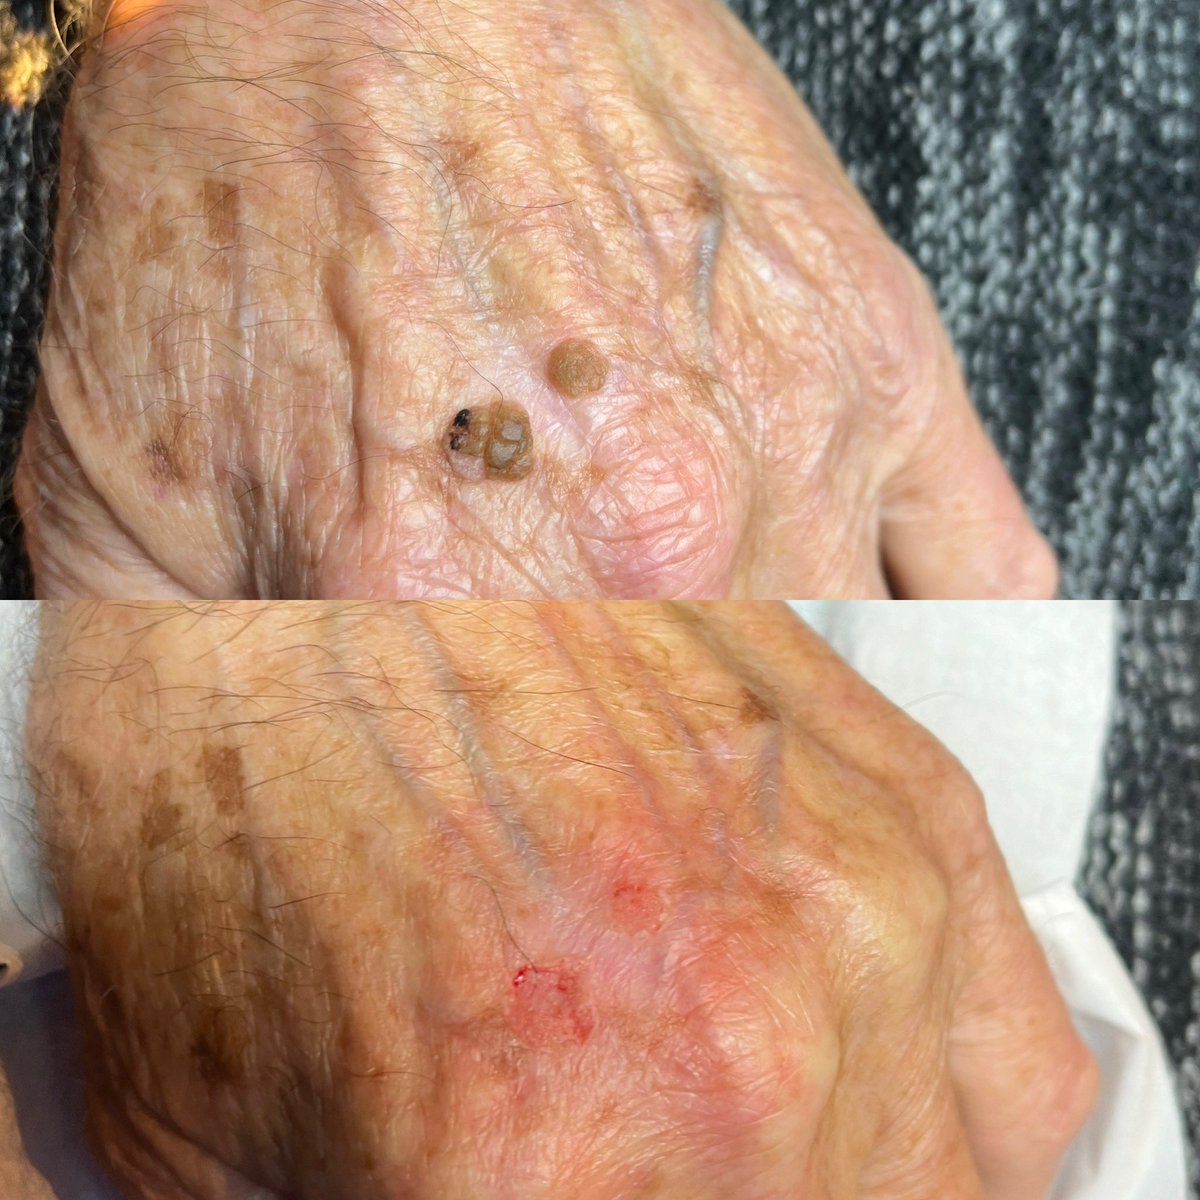 Before and After removal 
#halcyondsysskincare 
#advancedskincare 
#skinleisonremoval